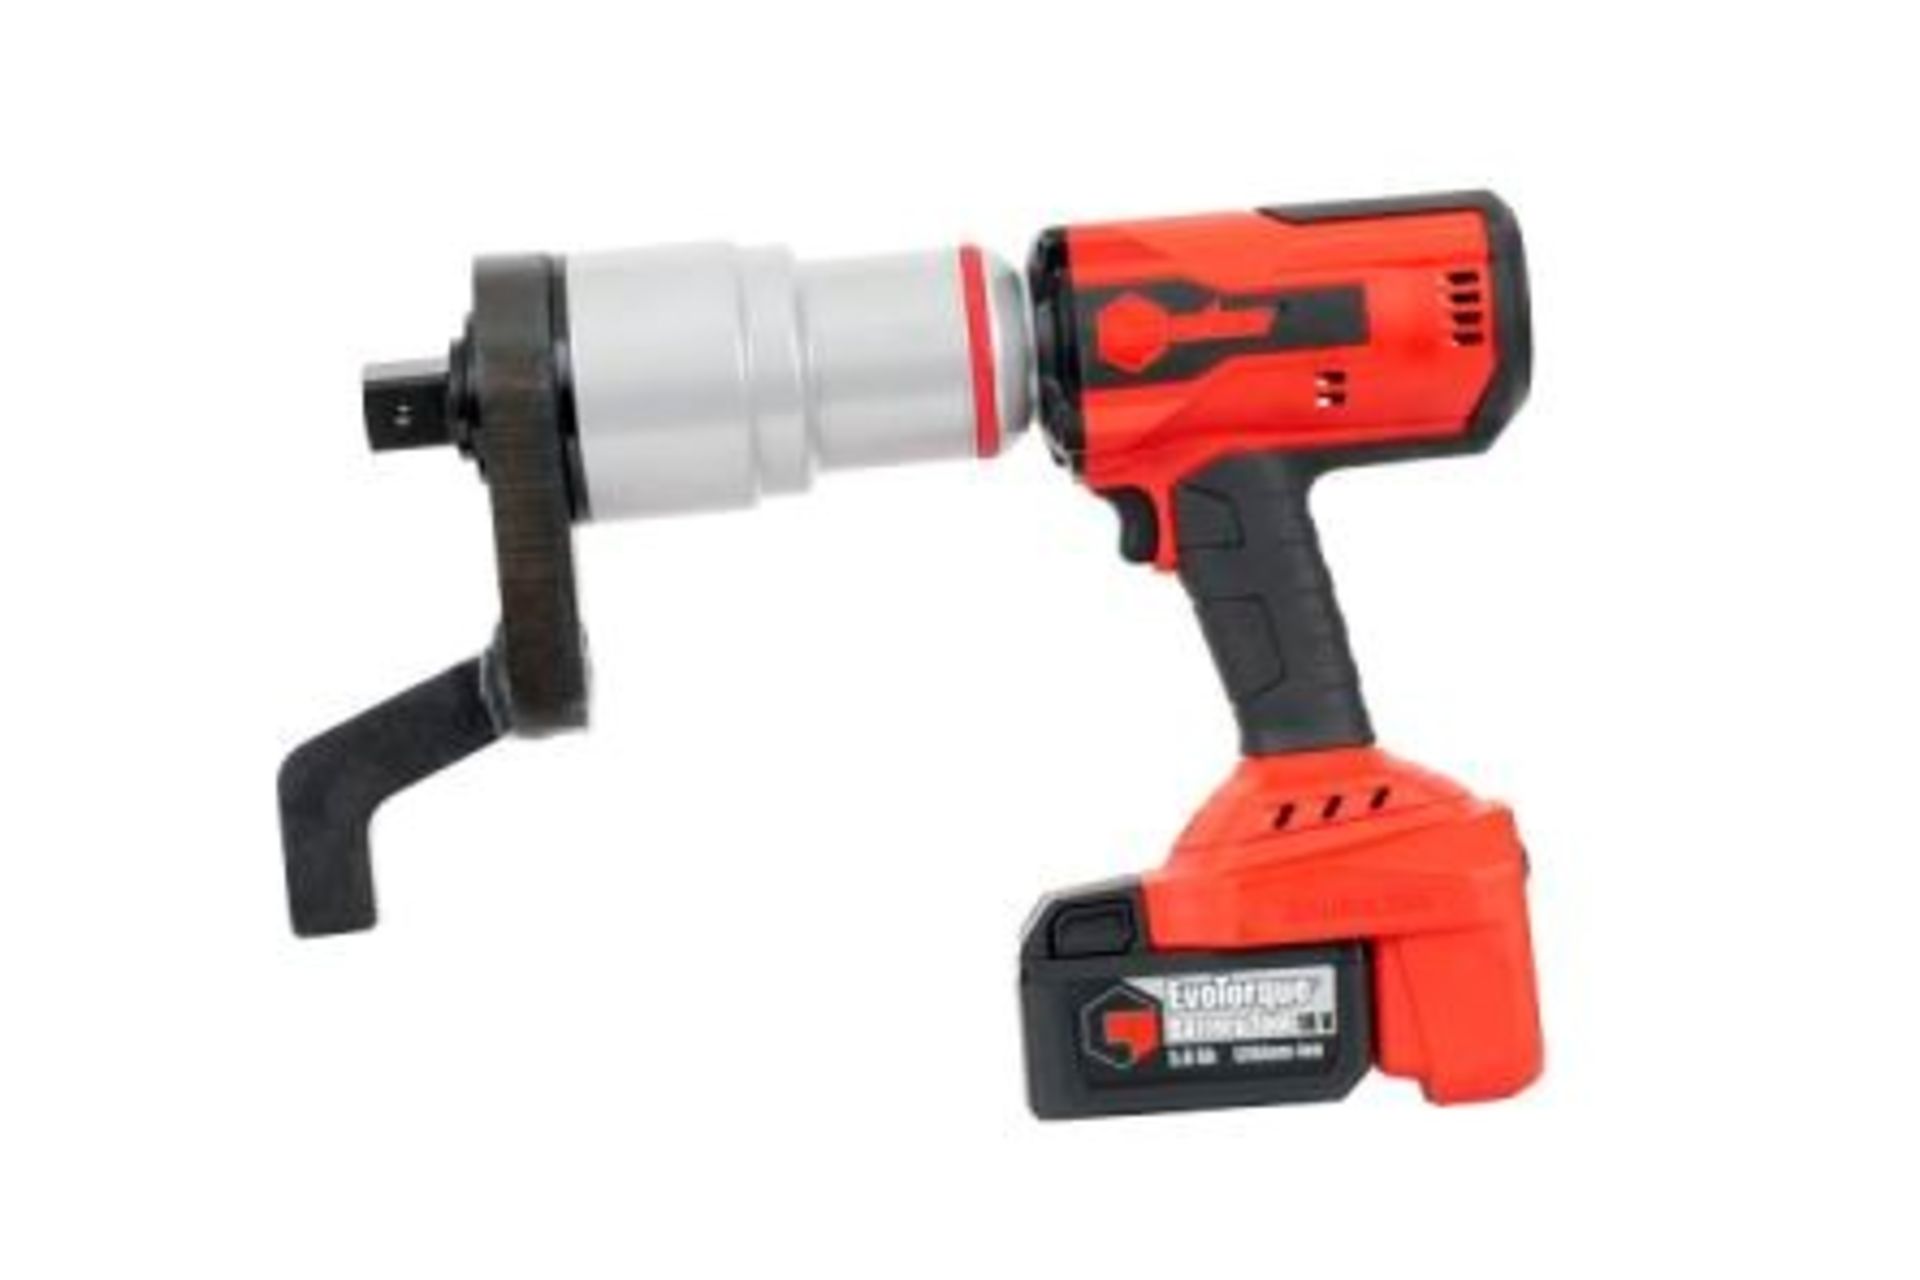 Norbar Torque Tools EBT-72-4000 Cordless Torque Wrench, 800Nm- 4000Nm, 1 in Drive, 1 Type G - Britis